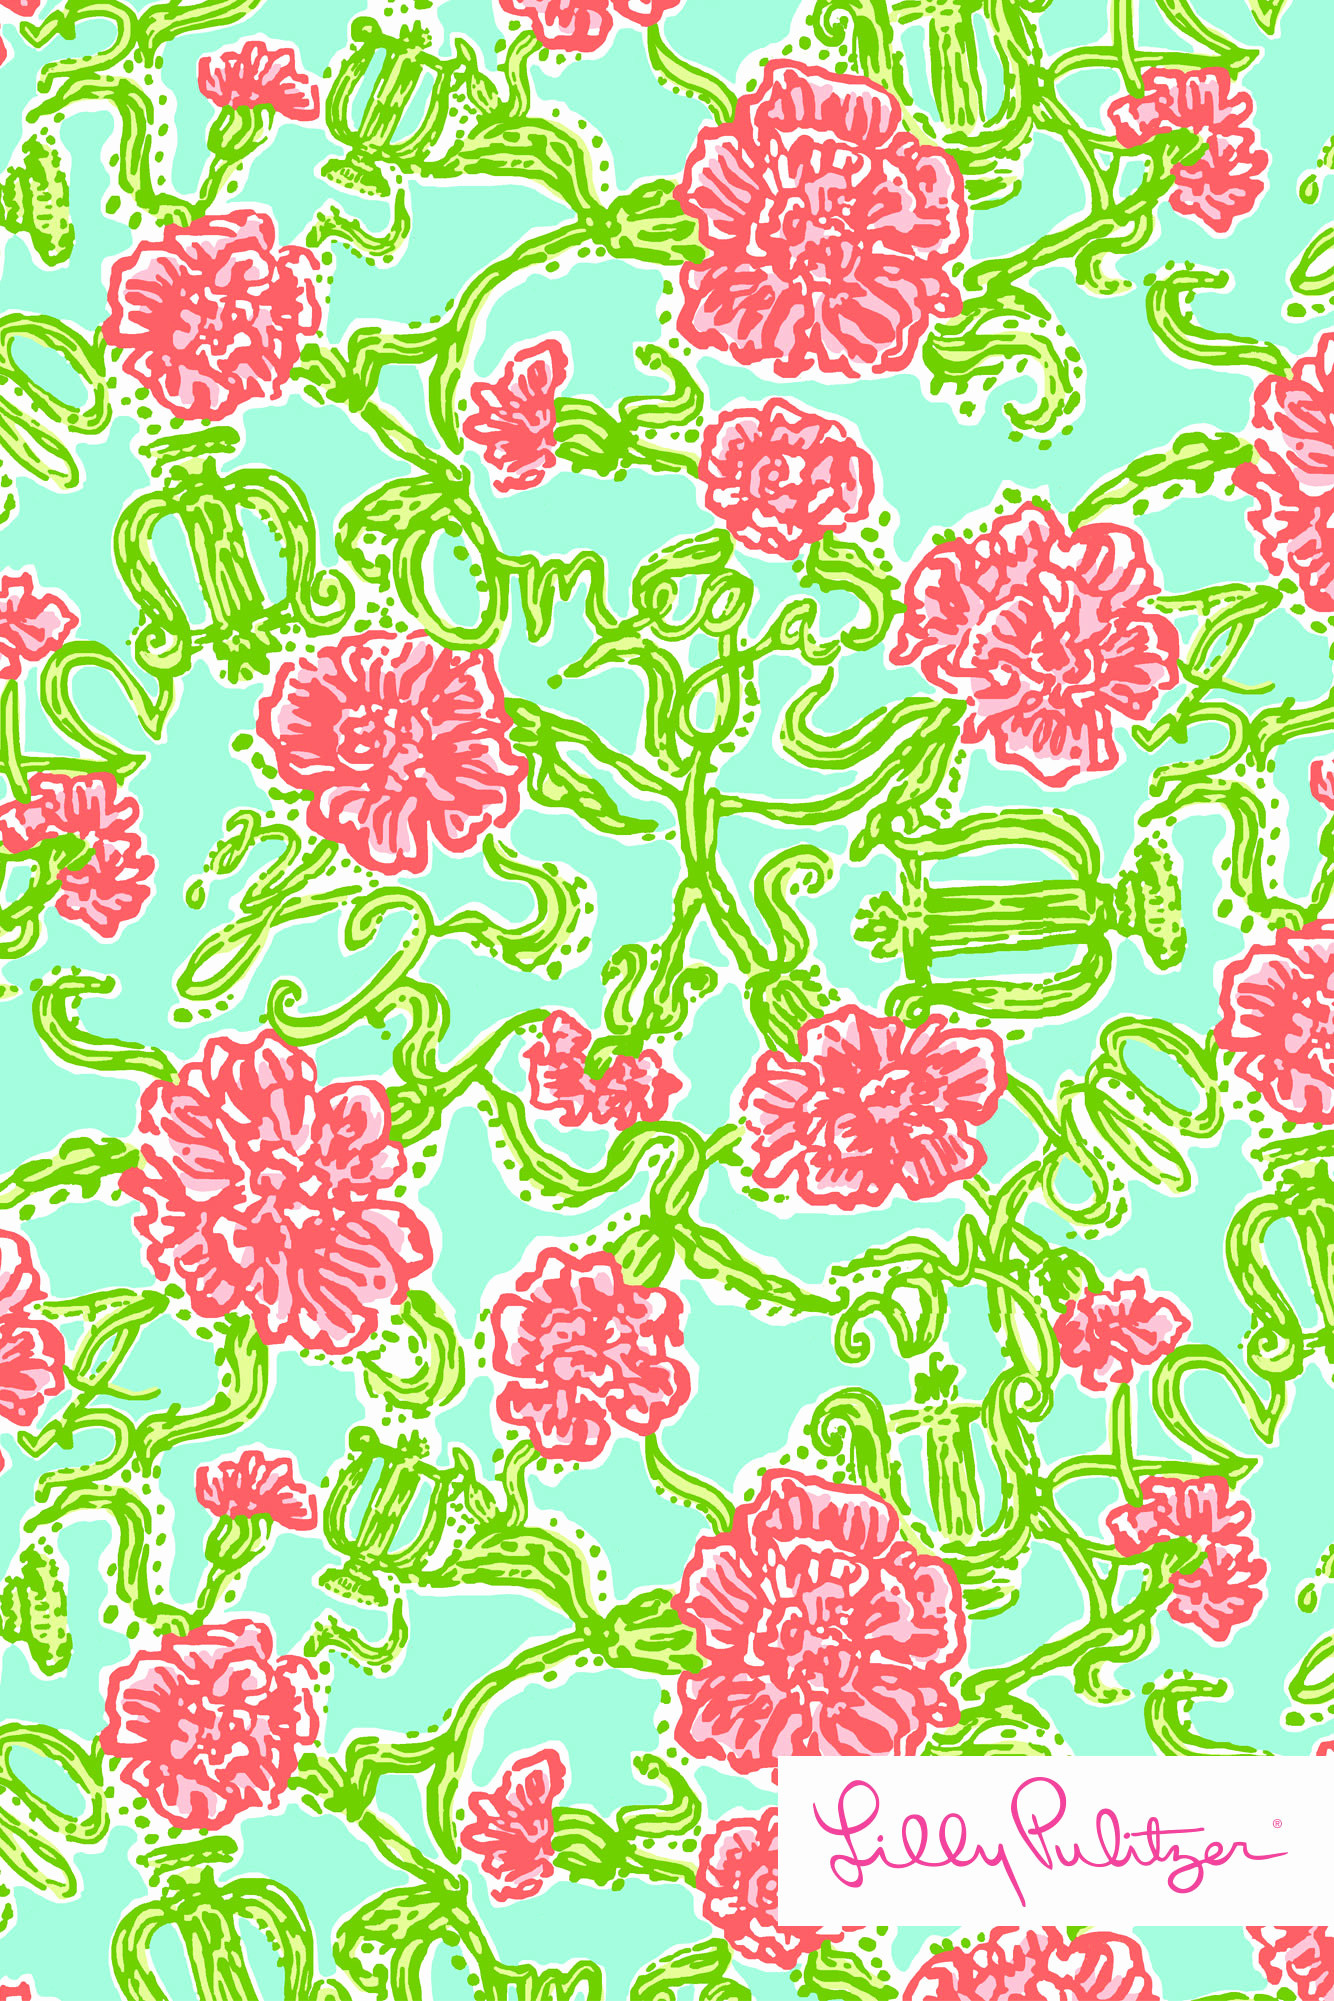 Alpha Chi Omega Lilly Pulitzer , HD Wallpaper & Backgrounds